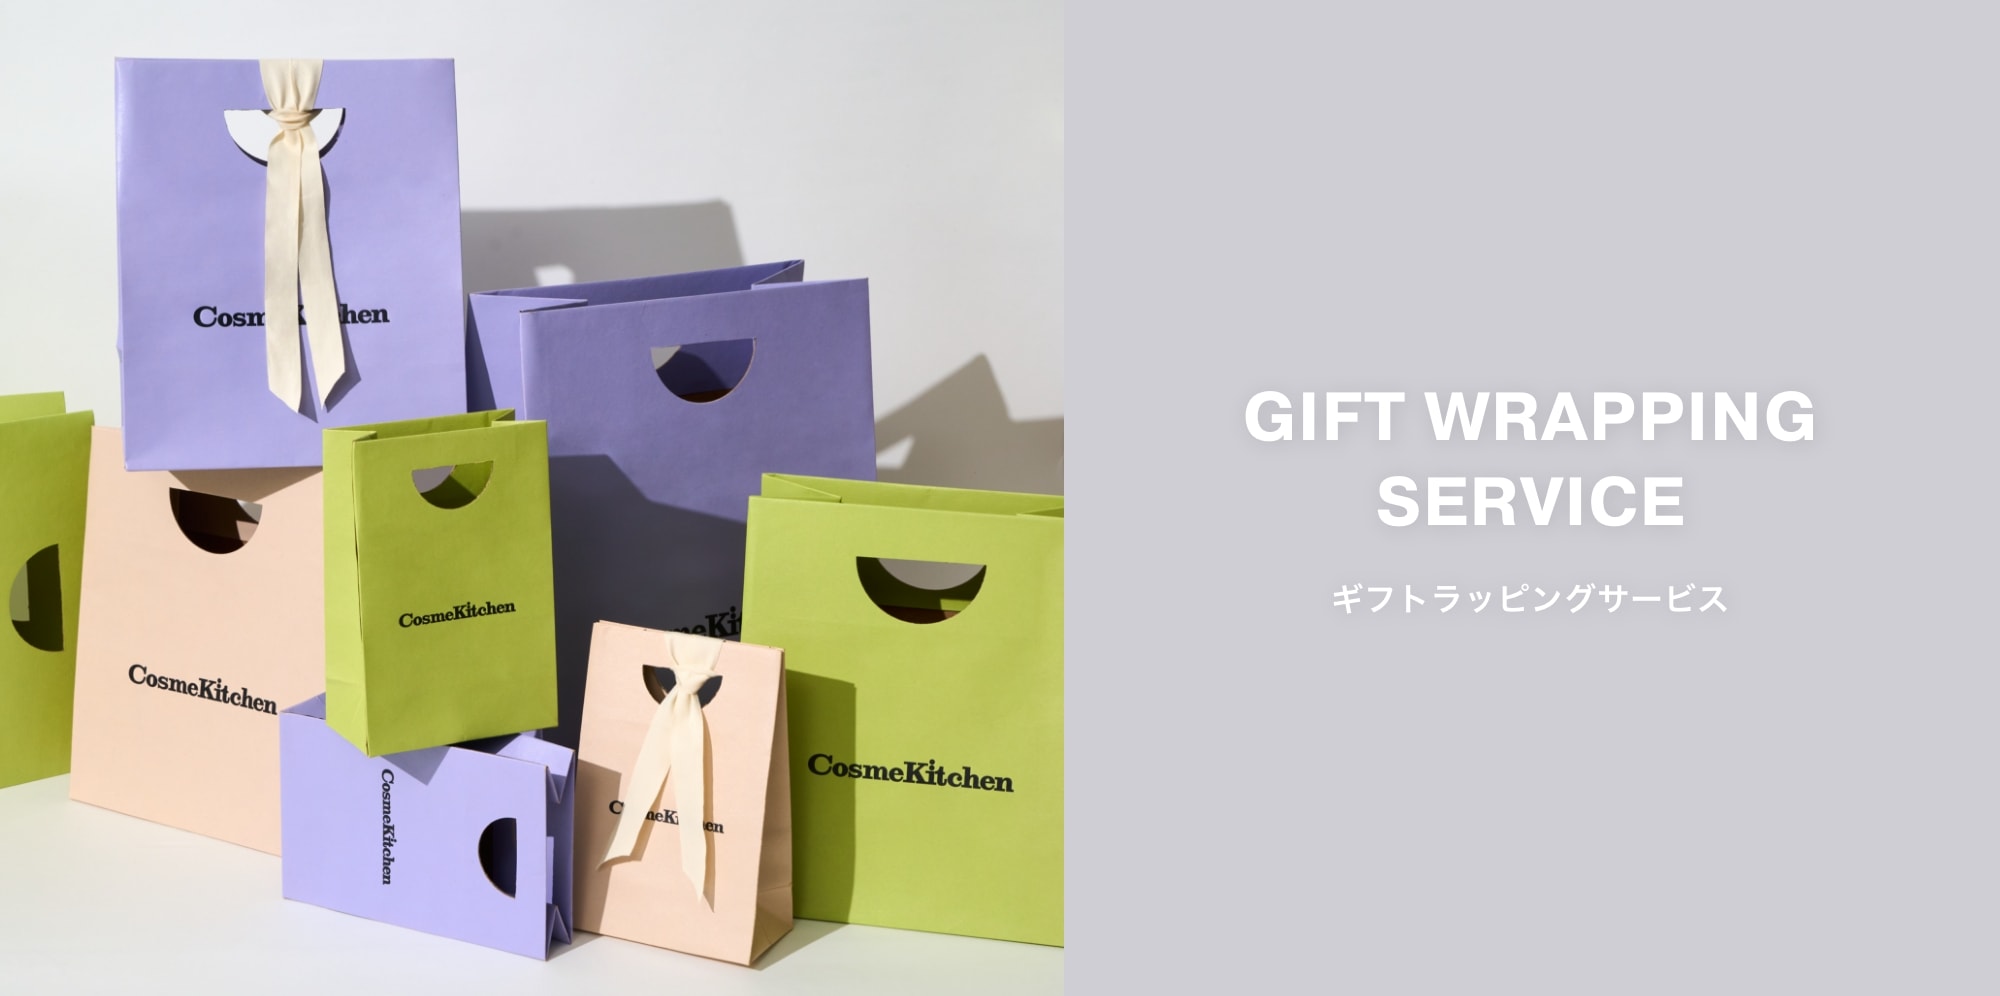 GIFT WRAPPING SERVICE ギフトラッピングサービス